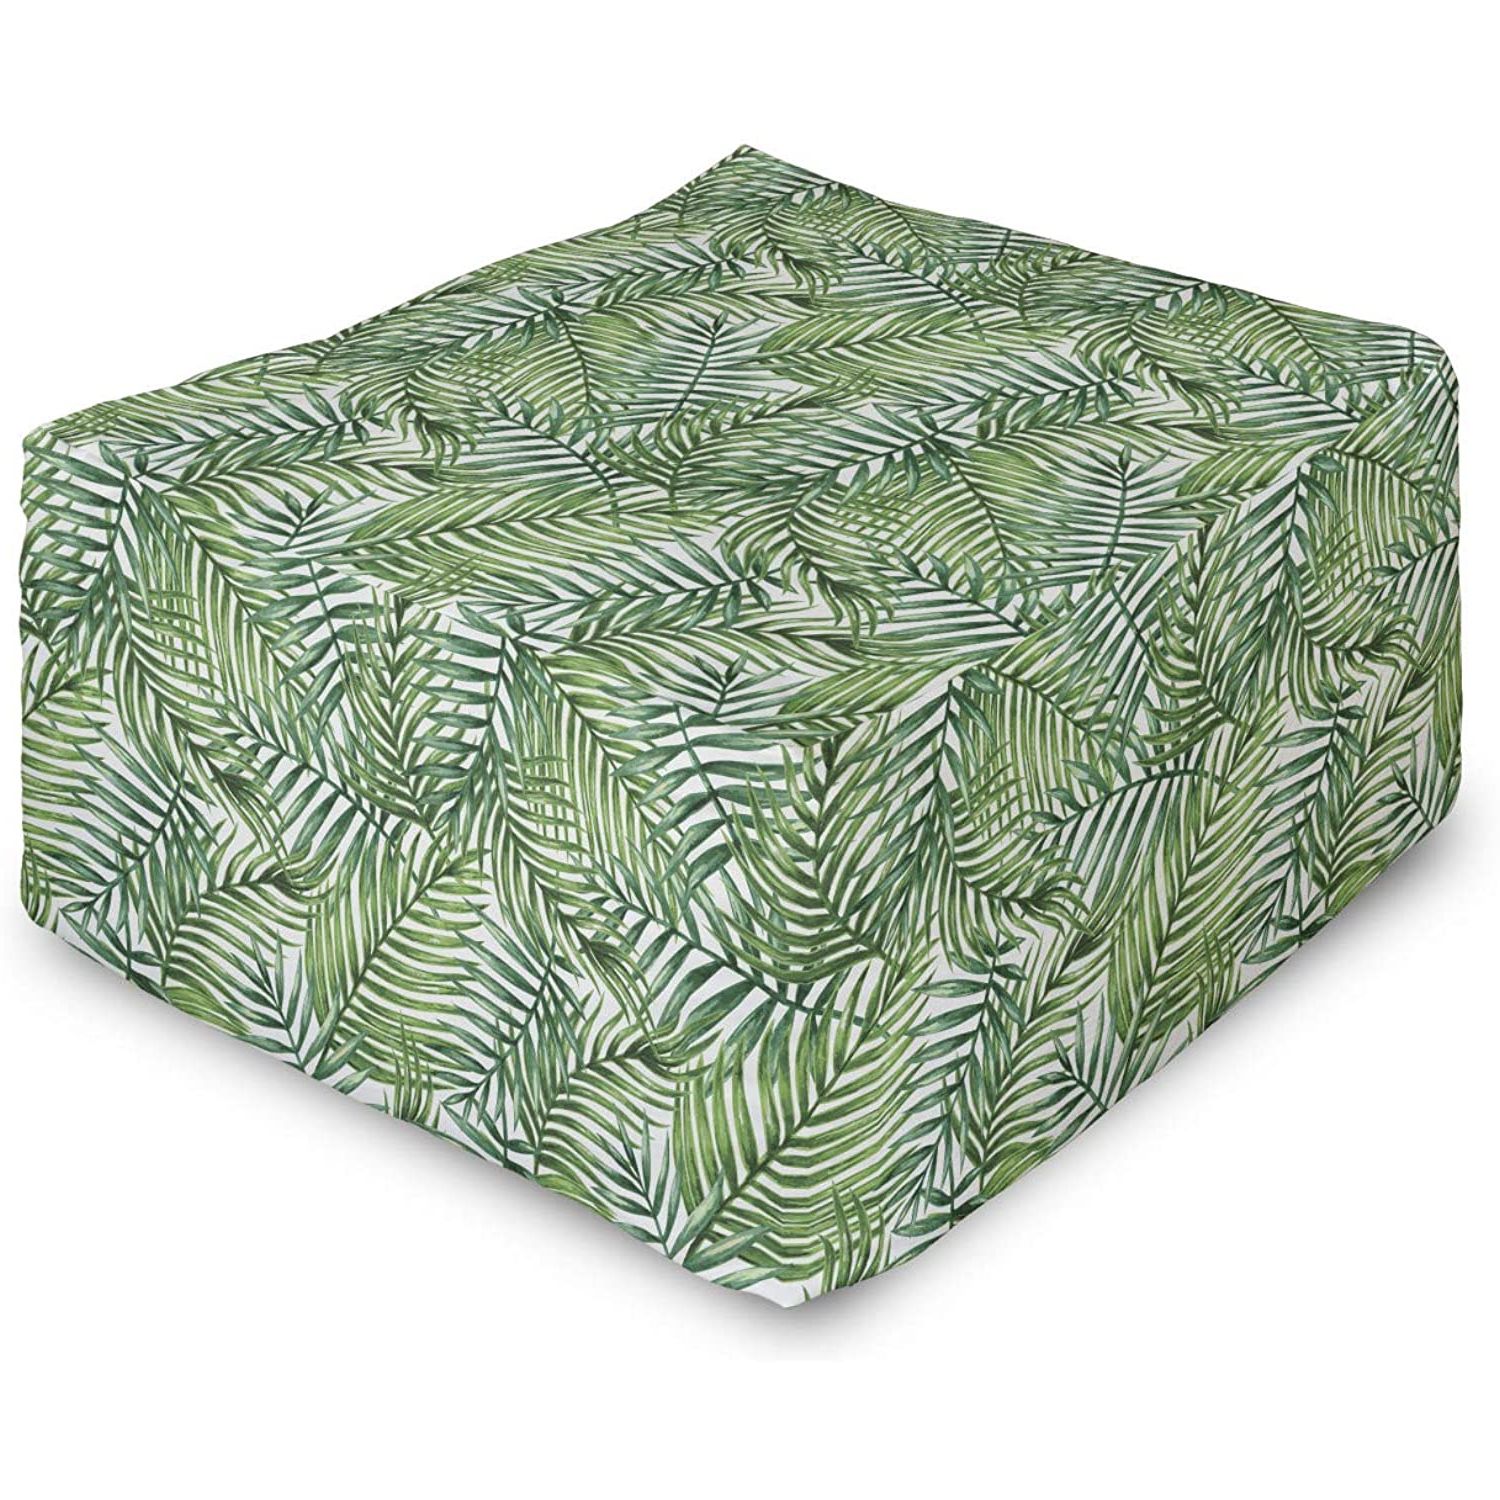 Amazon: Ambesonne Leaf Rectangle Pouf, Watercolor Print Botanical Pertaining To Most Current Beige And Dark Gray Ombre Cylinder Pouf Ottomans (View 10 of 10)